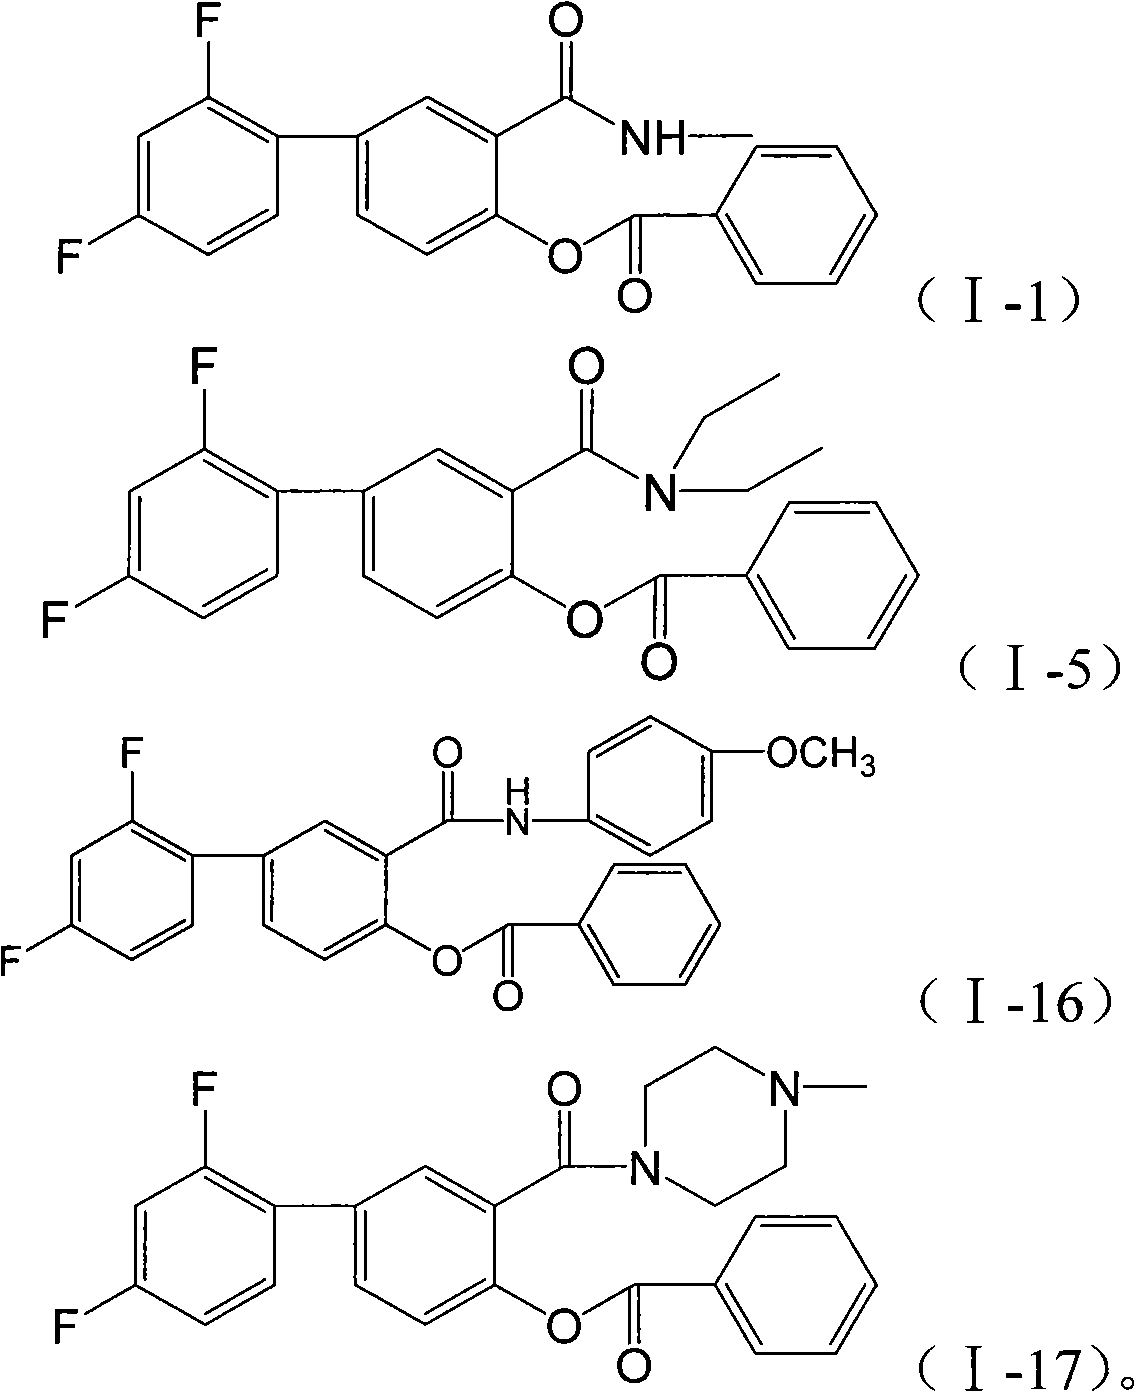 Benzoyl fluoride benzene salicylamide compounds, preparation and application thereof